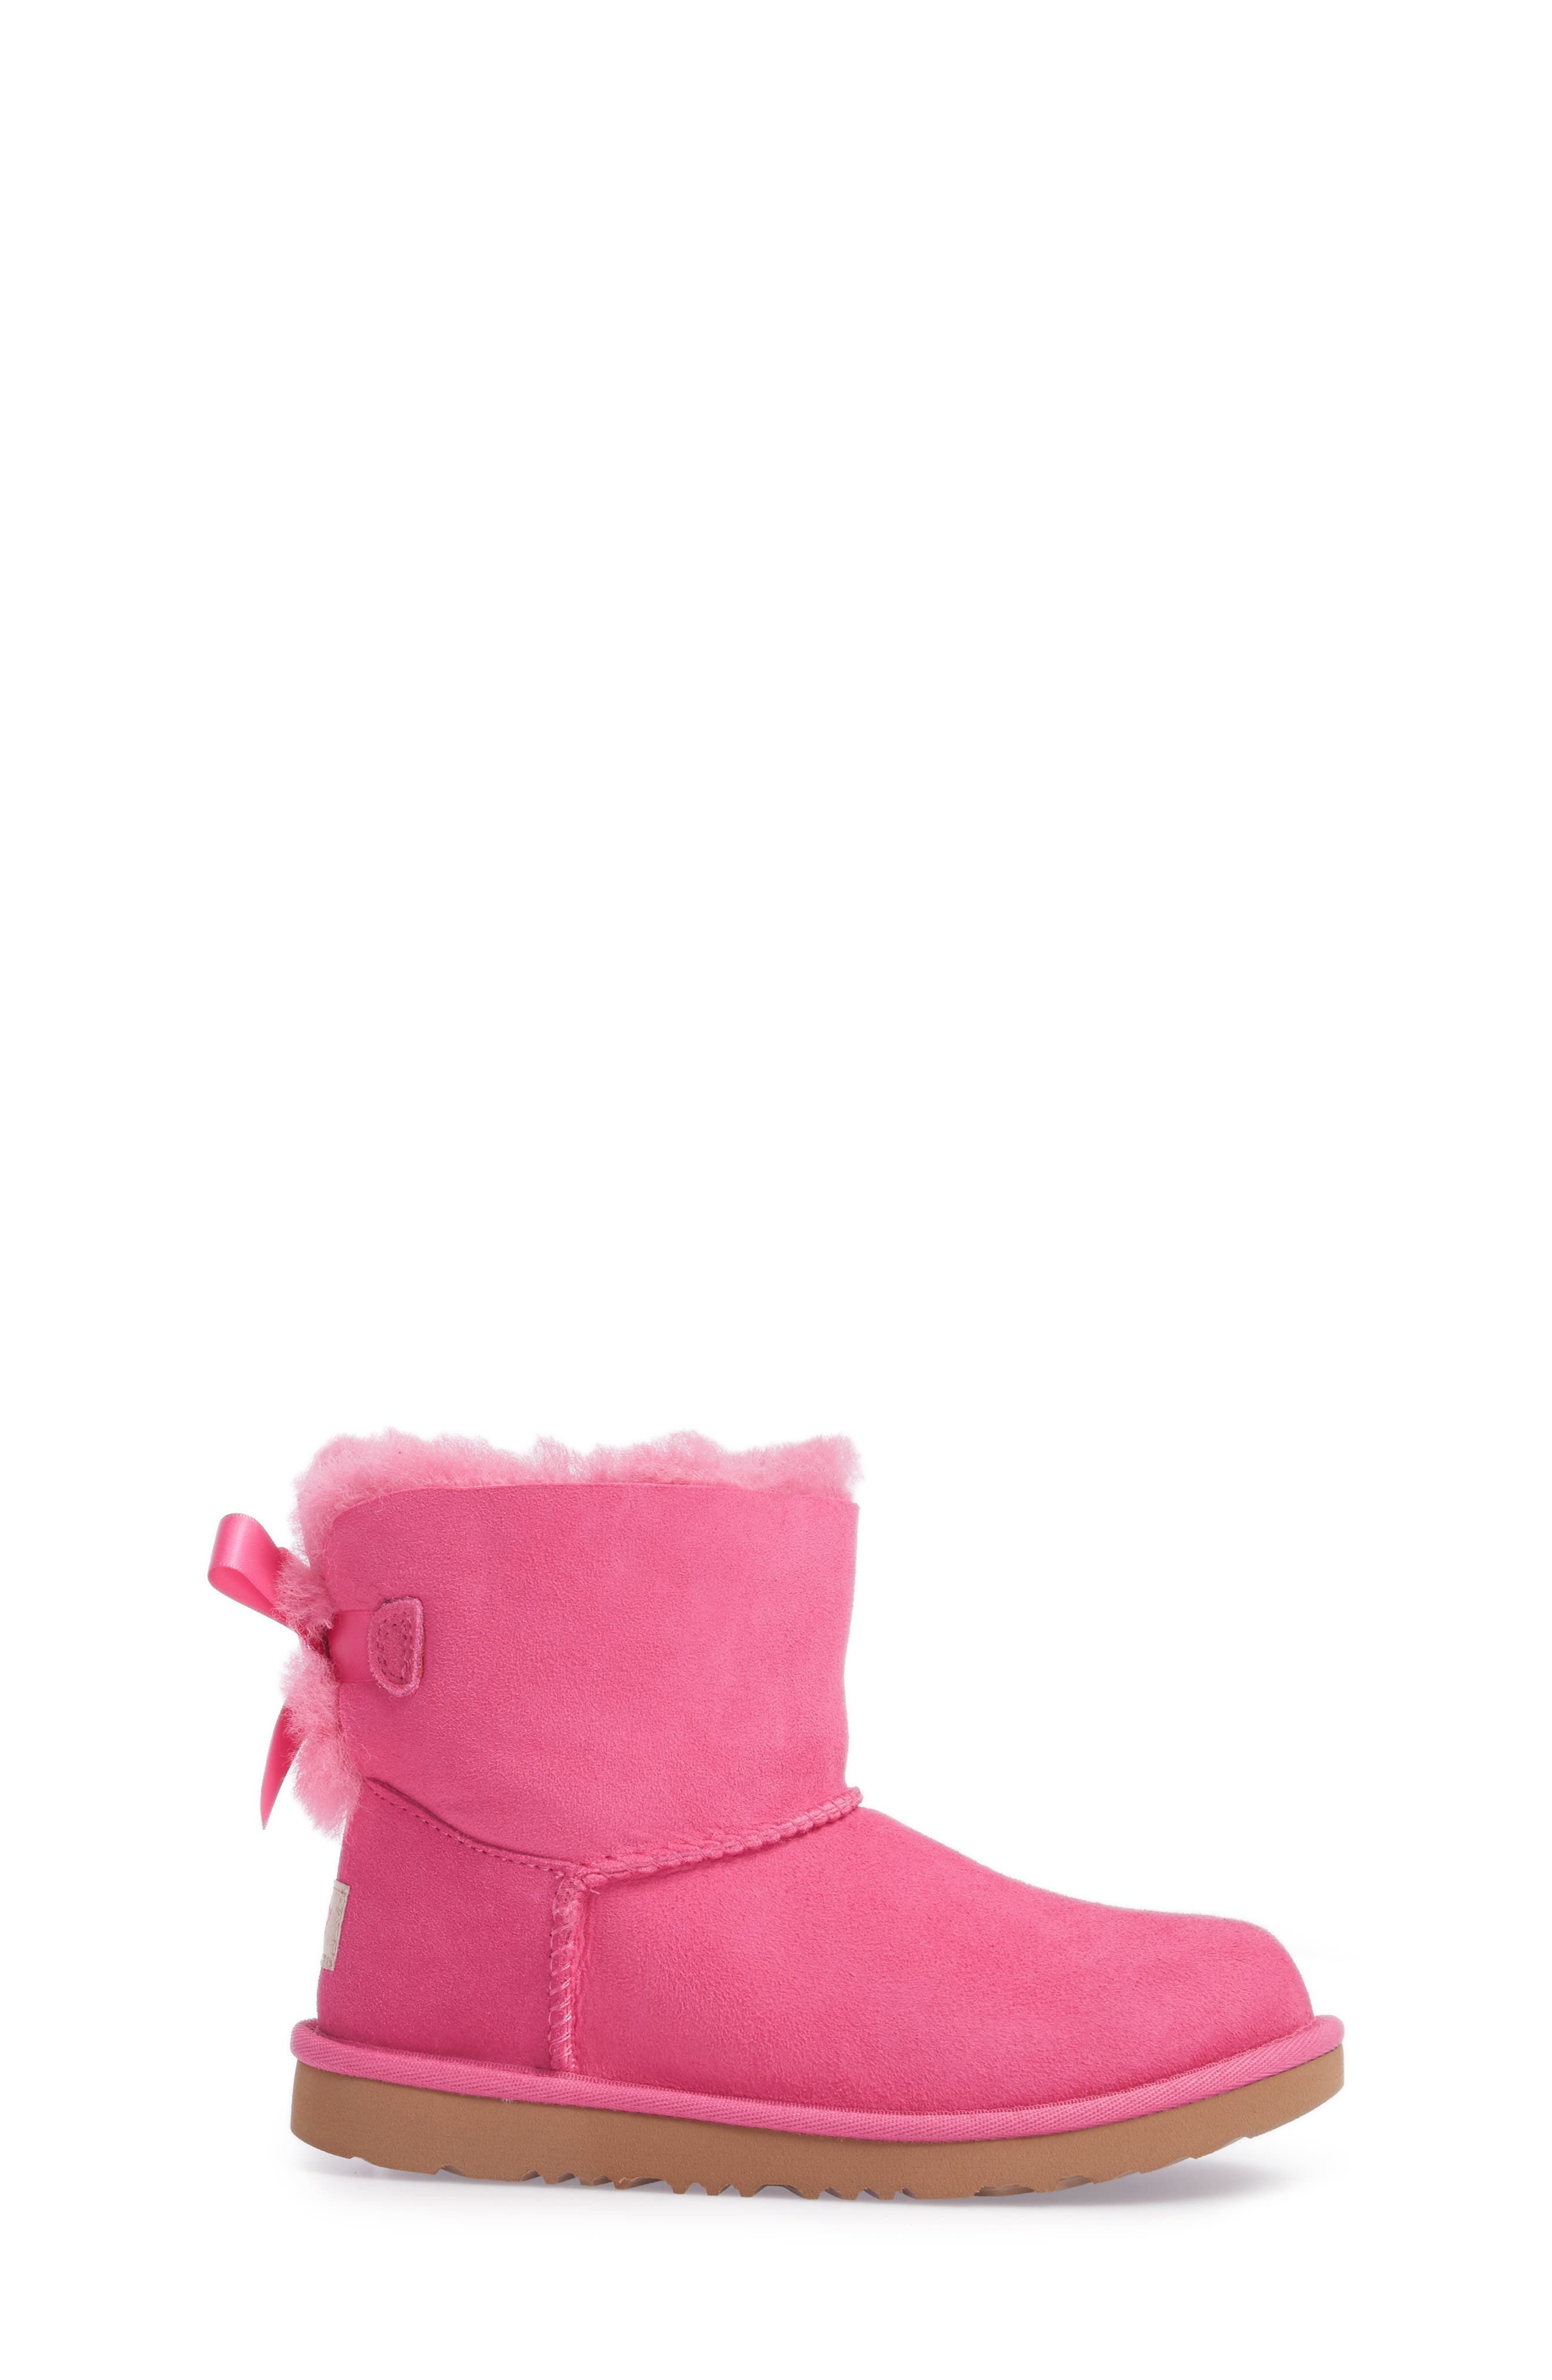 bailey bow ii water resistant genuine shearling boot